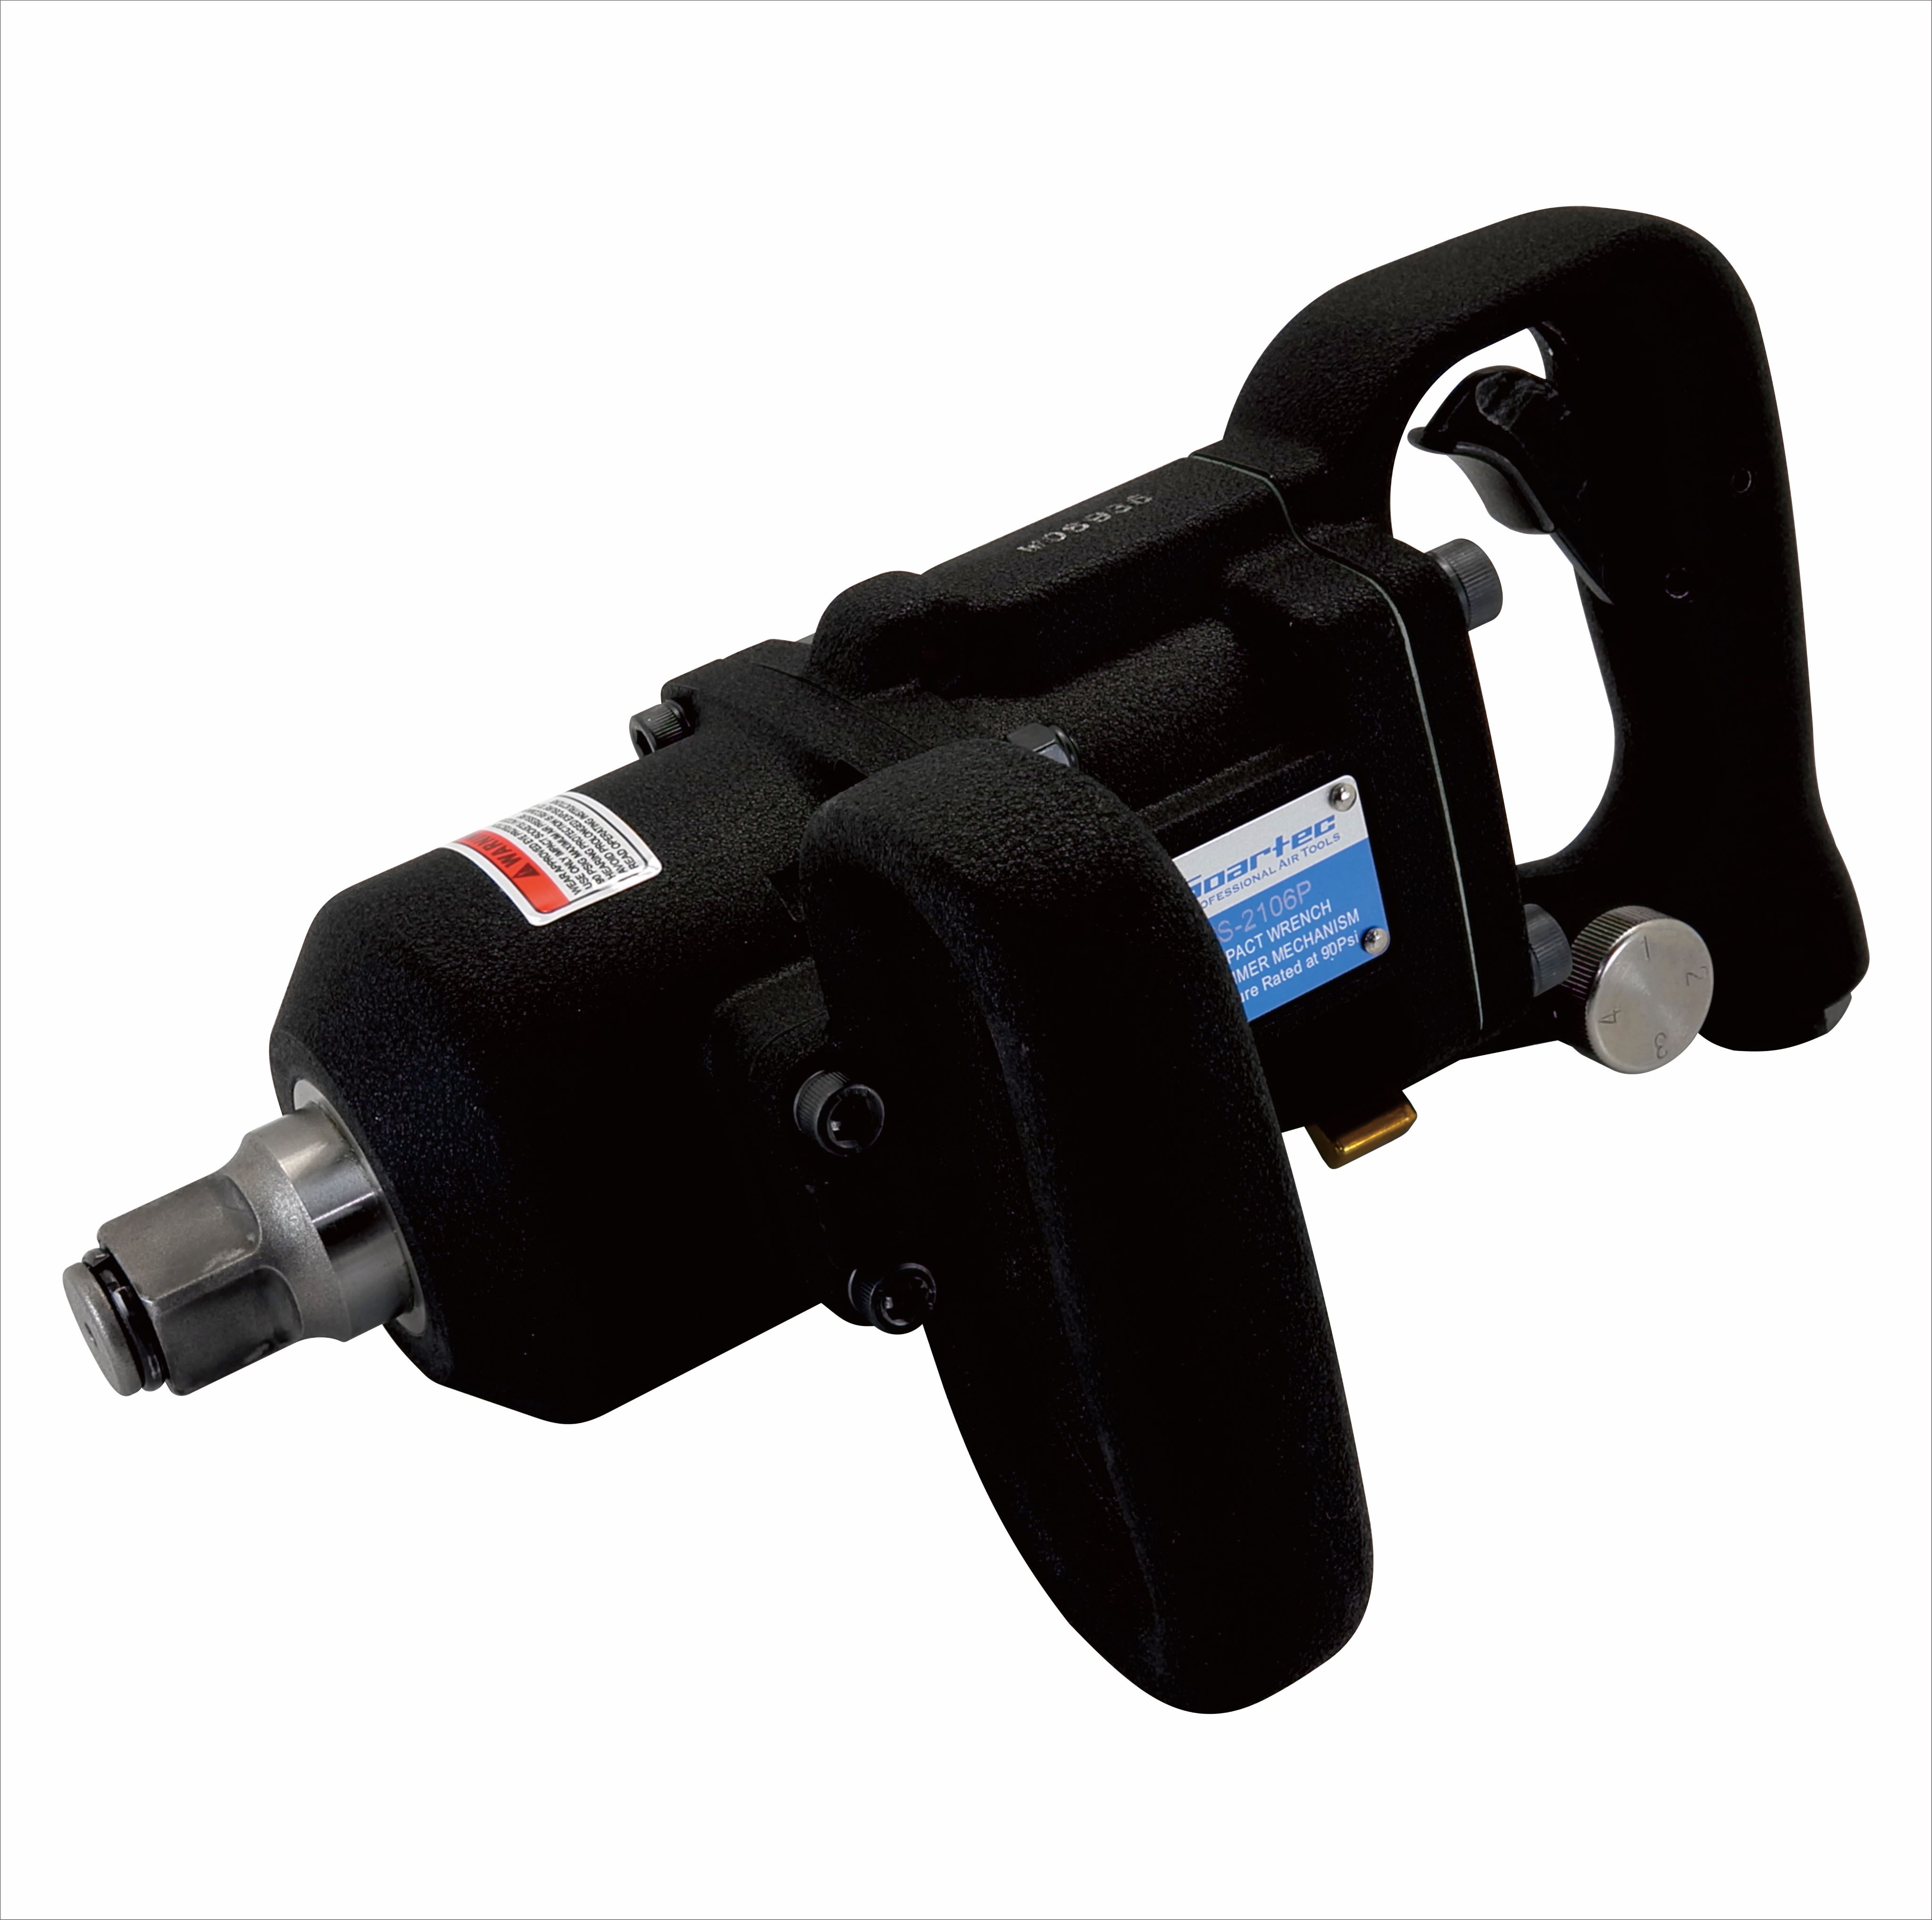 Air Powered Pneumatic Tools Dr. 3/4 Impact Wrench Straigjt type100% Made in Taiwan